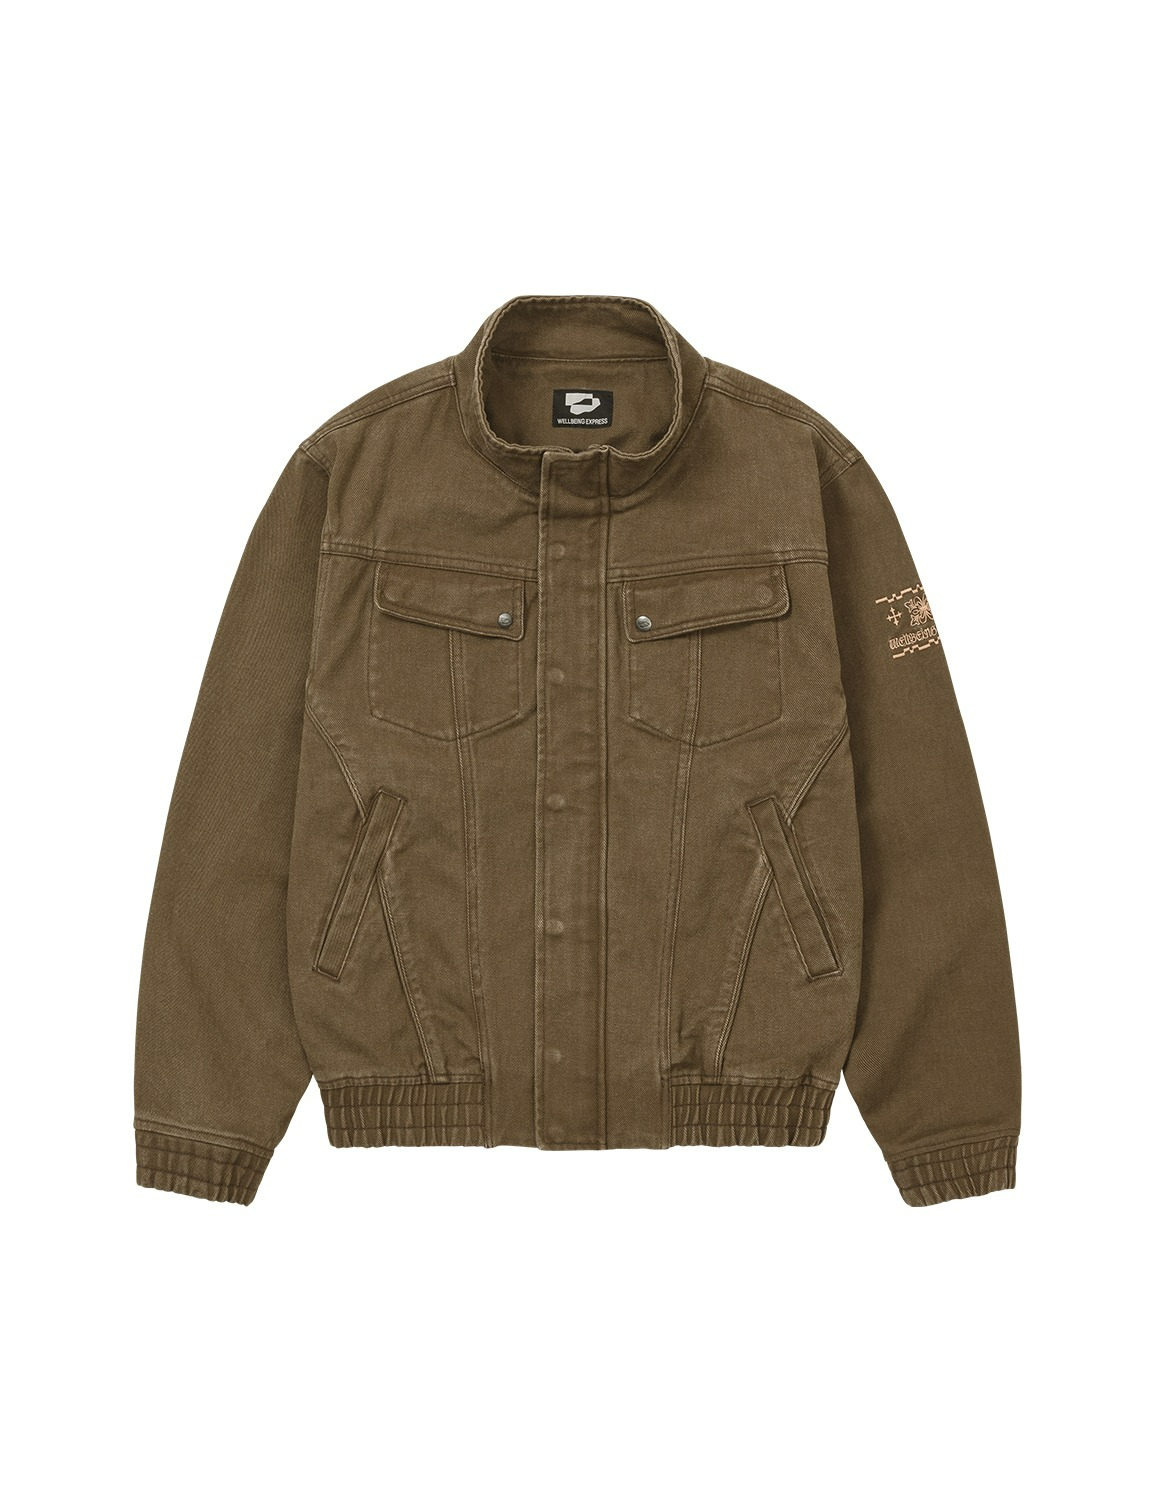 (SS) Washed Everyday Jacket Khaki Brown - WELLBEING EXPRESS